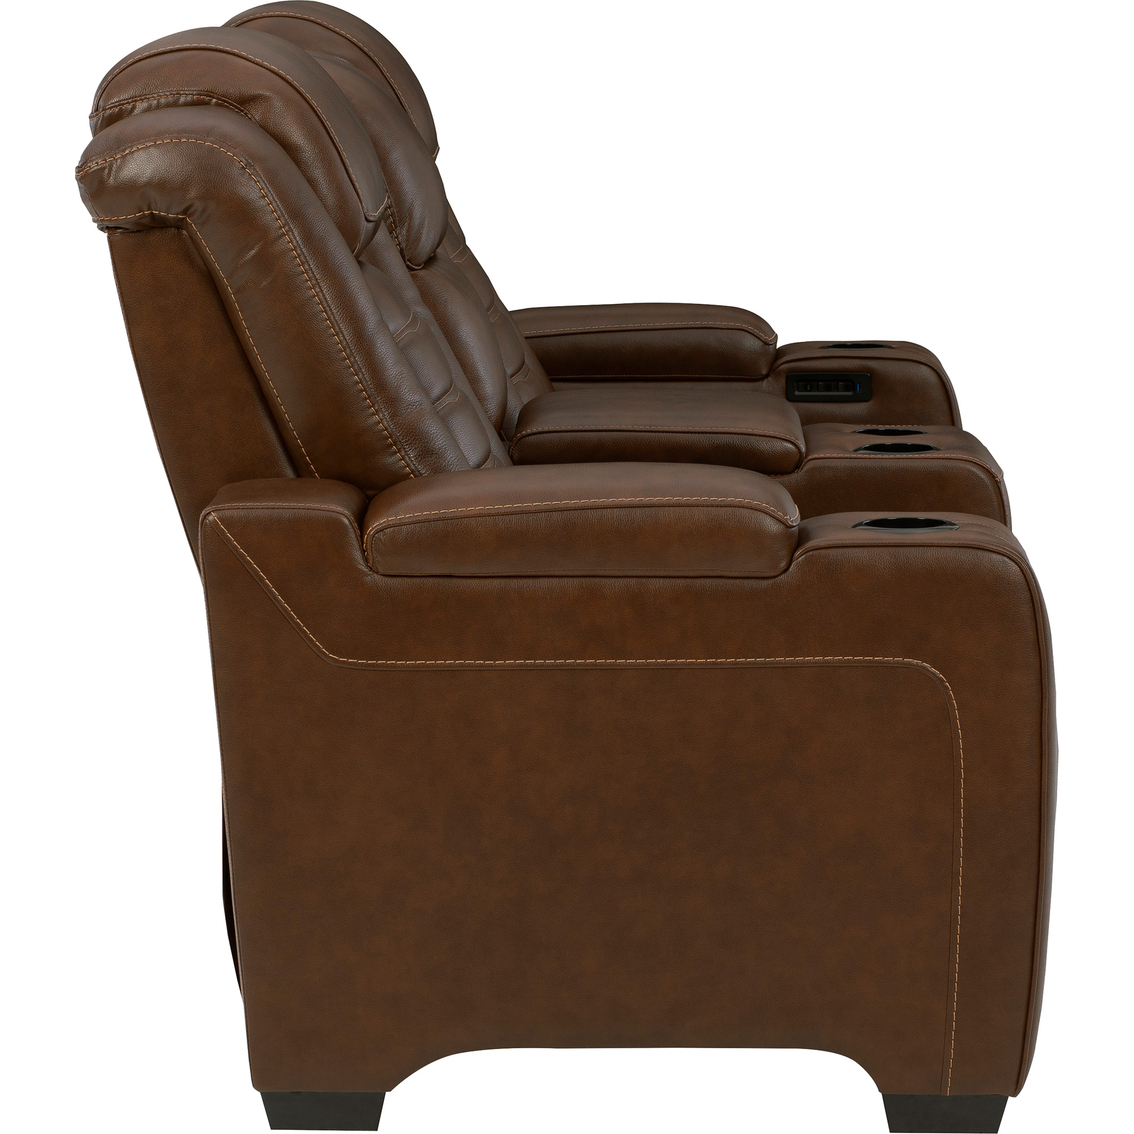 Signature Design by Ashley Backtrack Power Reclining Loveseat with Console - Image 4 of 10